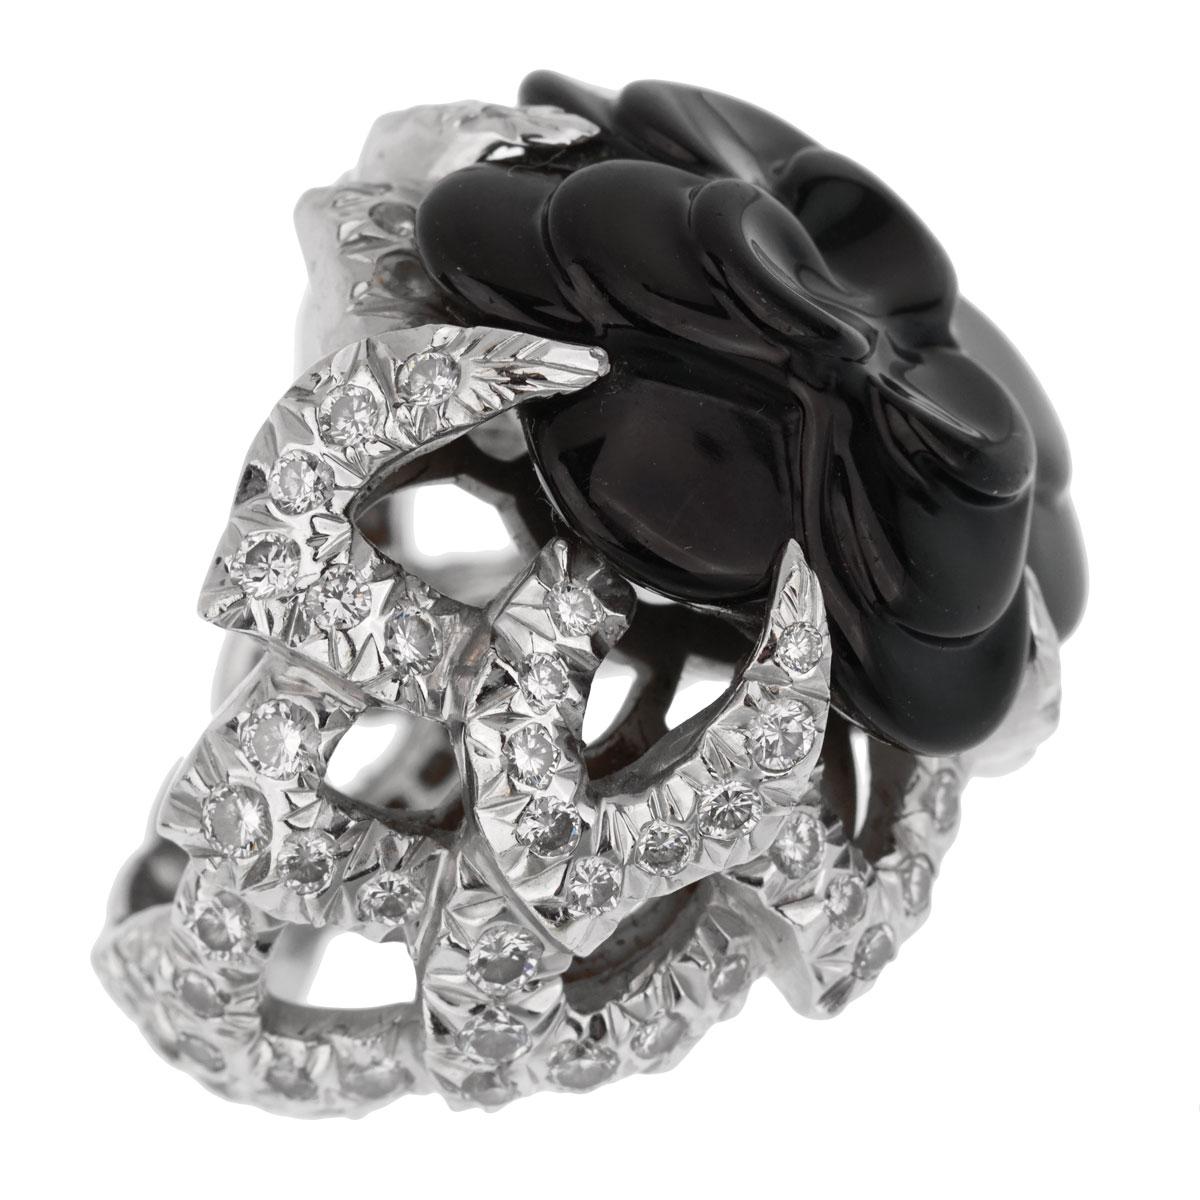 An iconic Chanel “Camélia” ring crafted in 18k white gold, the ring boasts a carved onyx and is adorned with 3cts appx of the finest chanel round brilliant cut diamonds. 

The ring measures a 6 1/4 and is resizeable